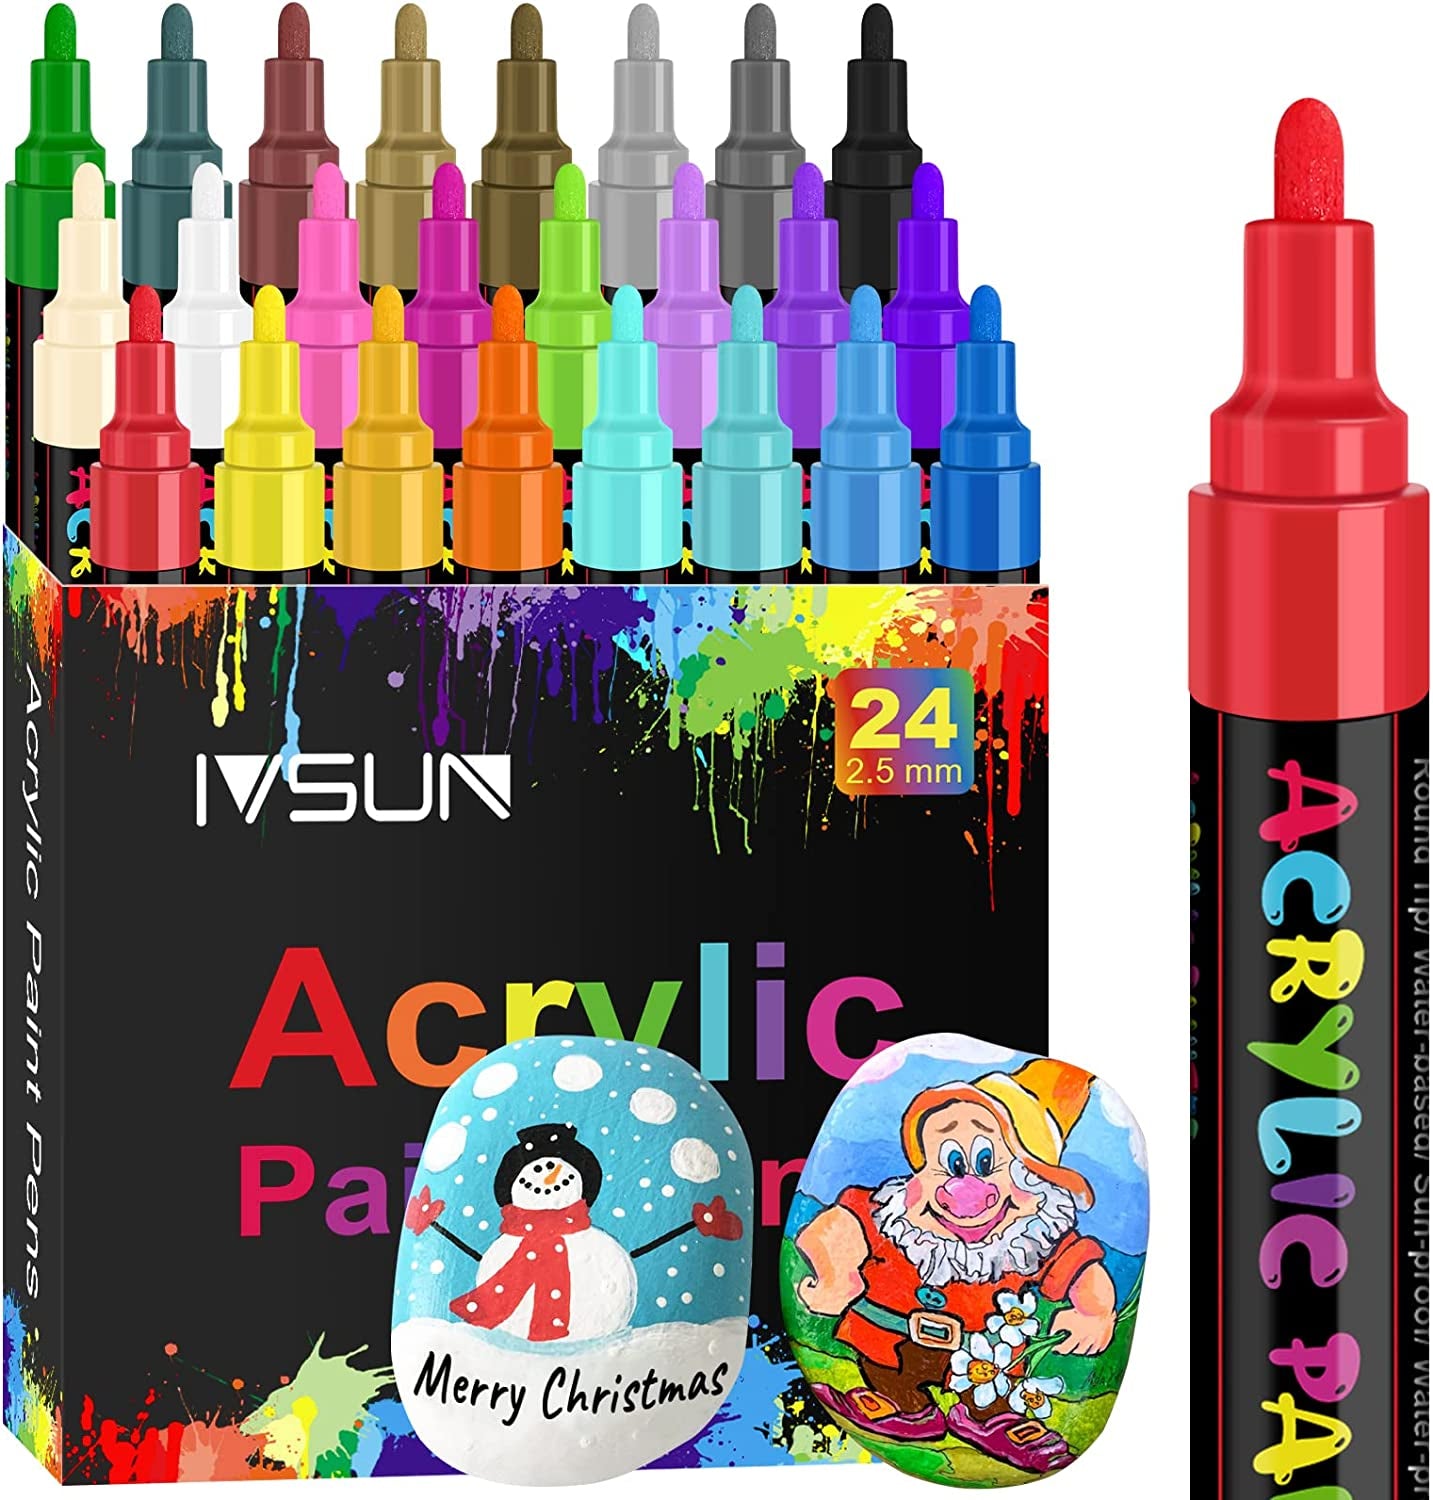 Paint Pens: The Versatile Art Supplies for Crafting and DIY